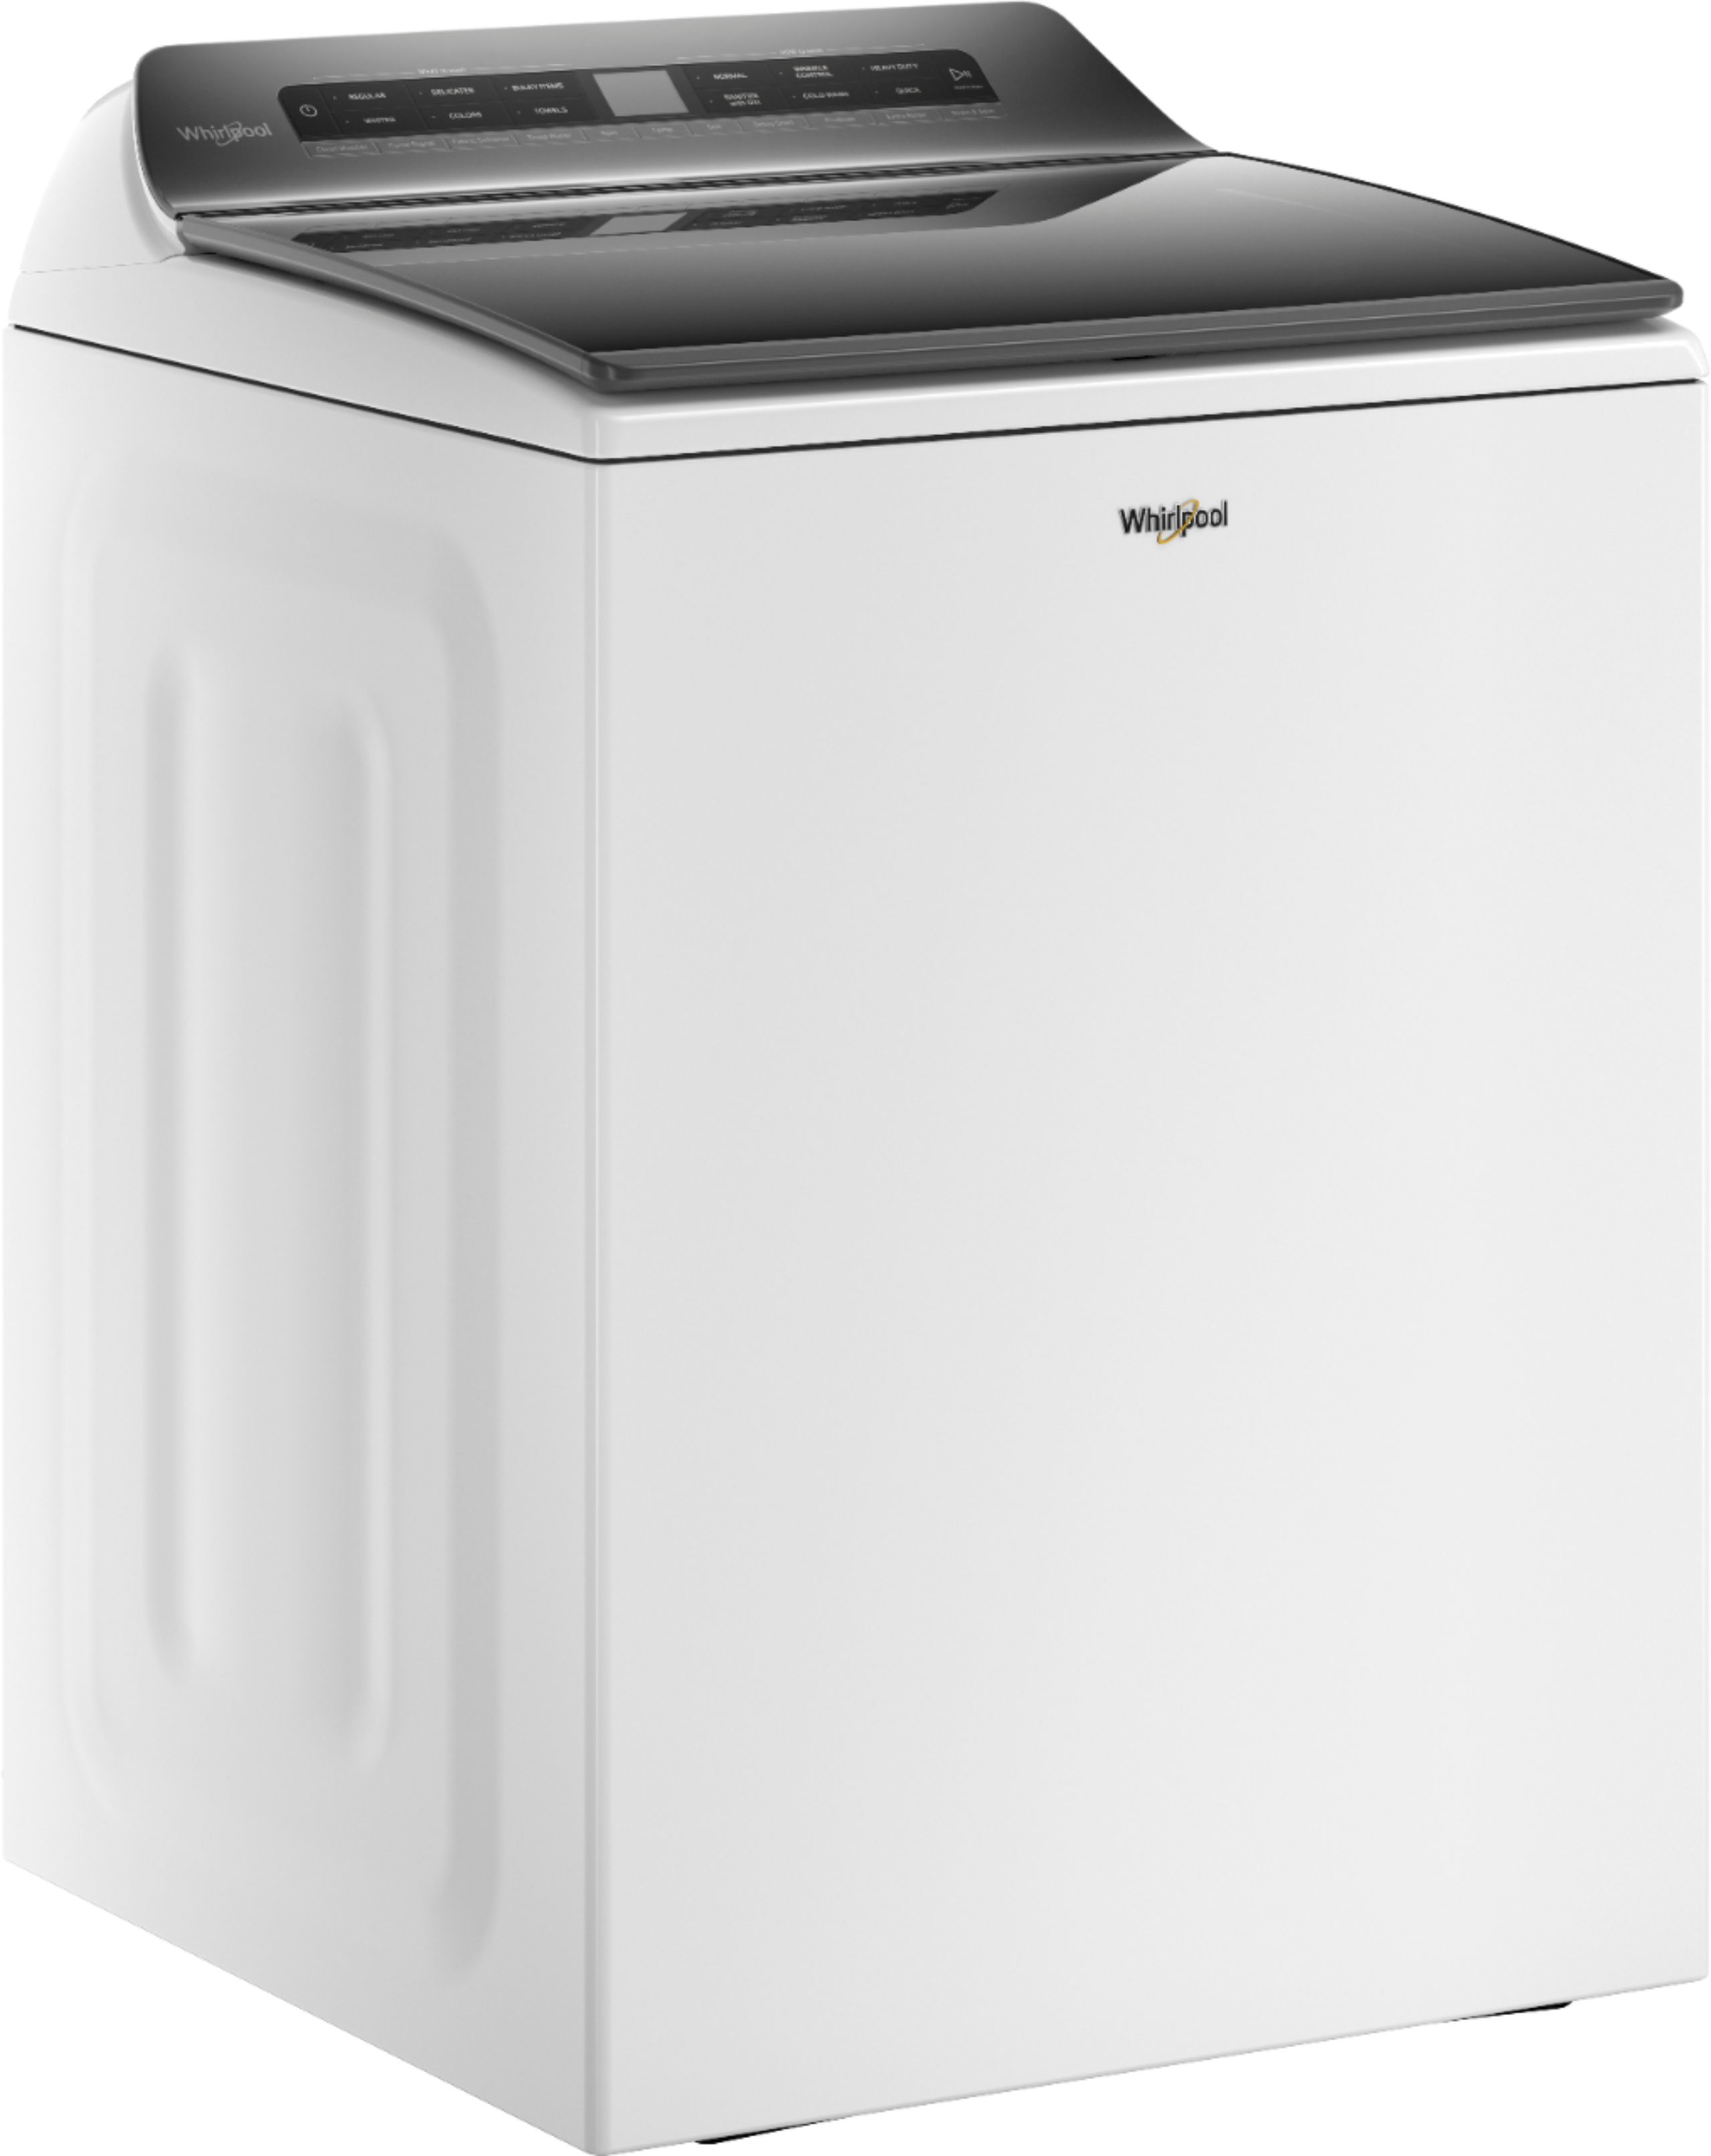 Angle View: Whirlpool - 4.7 Cu. Ft. Top Load Washer with Pretreat Station - White